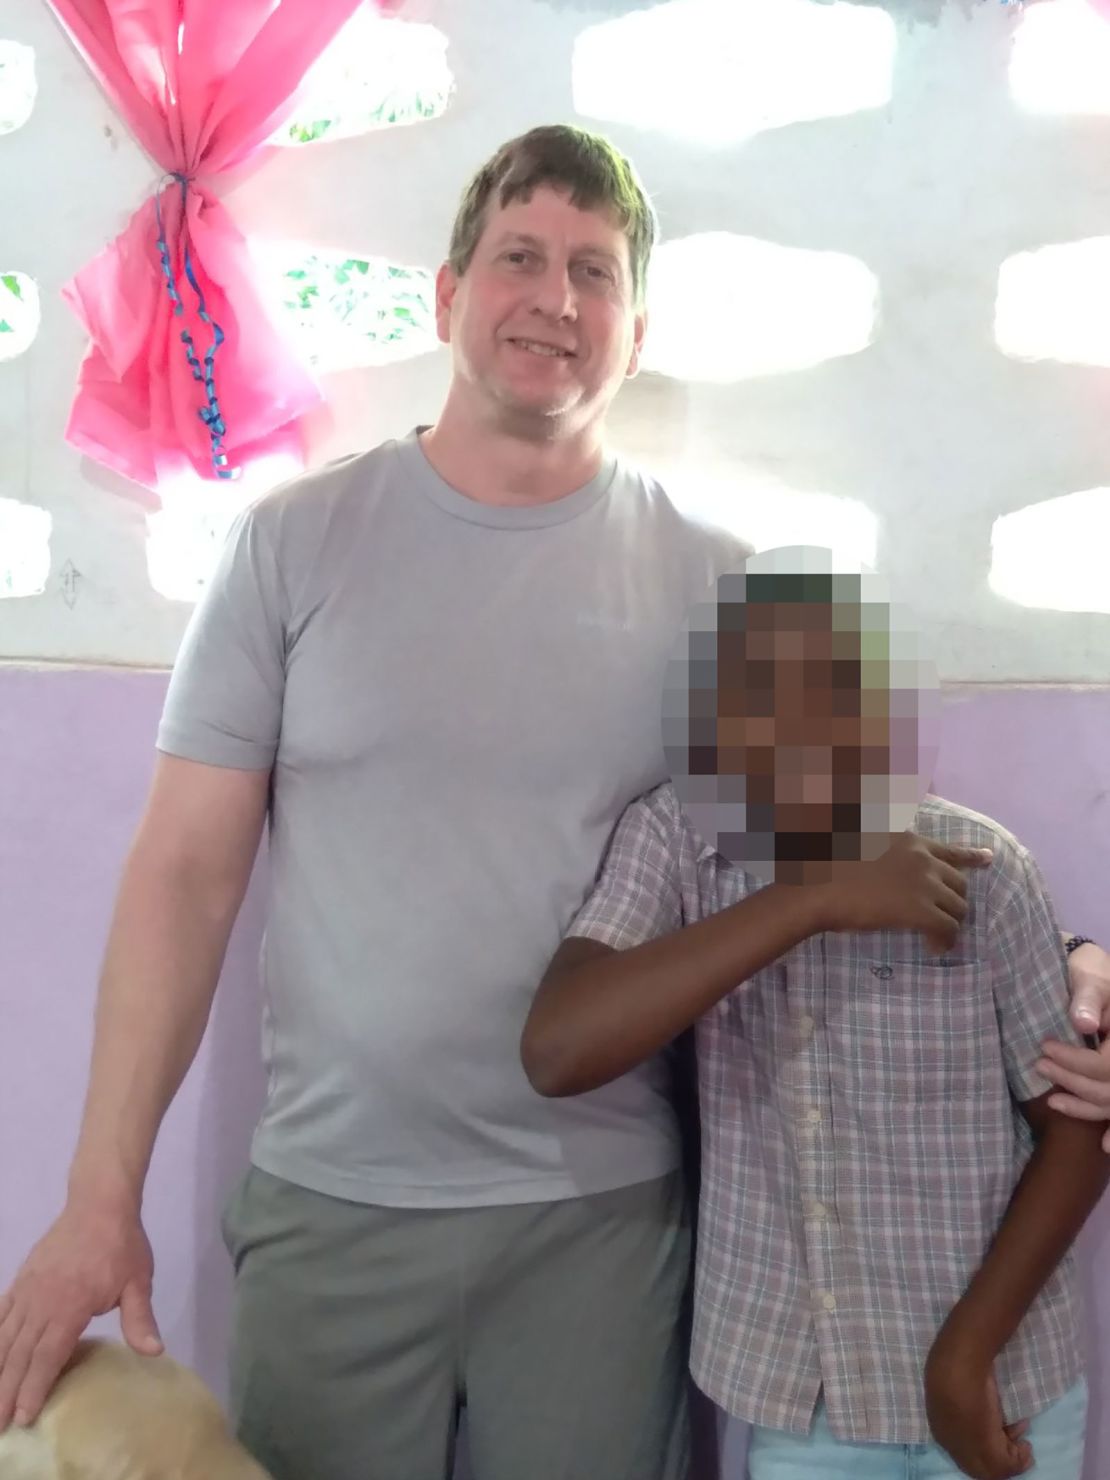 John Tennant is seen in an undated photo with one of the two teens the couple adopted from Haiti. CNN blurred the child's face to protect his identity.